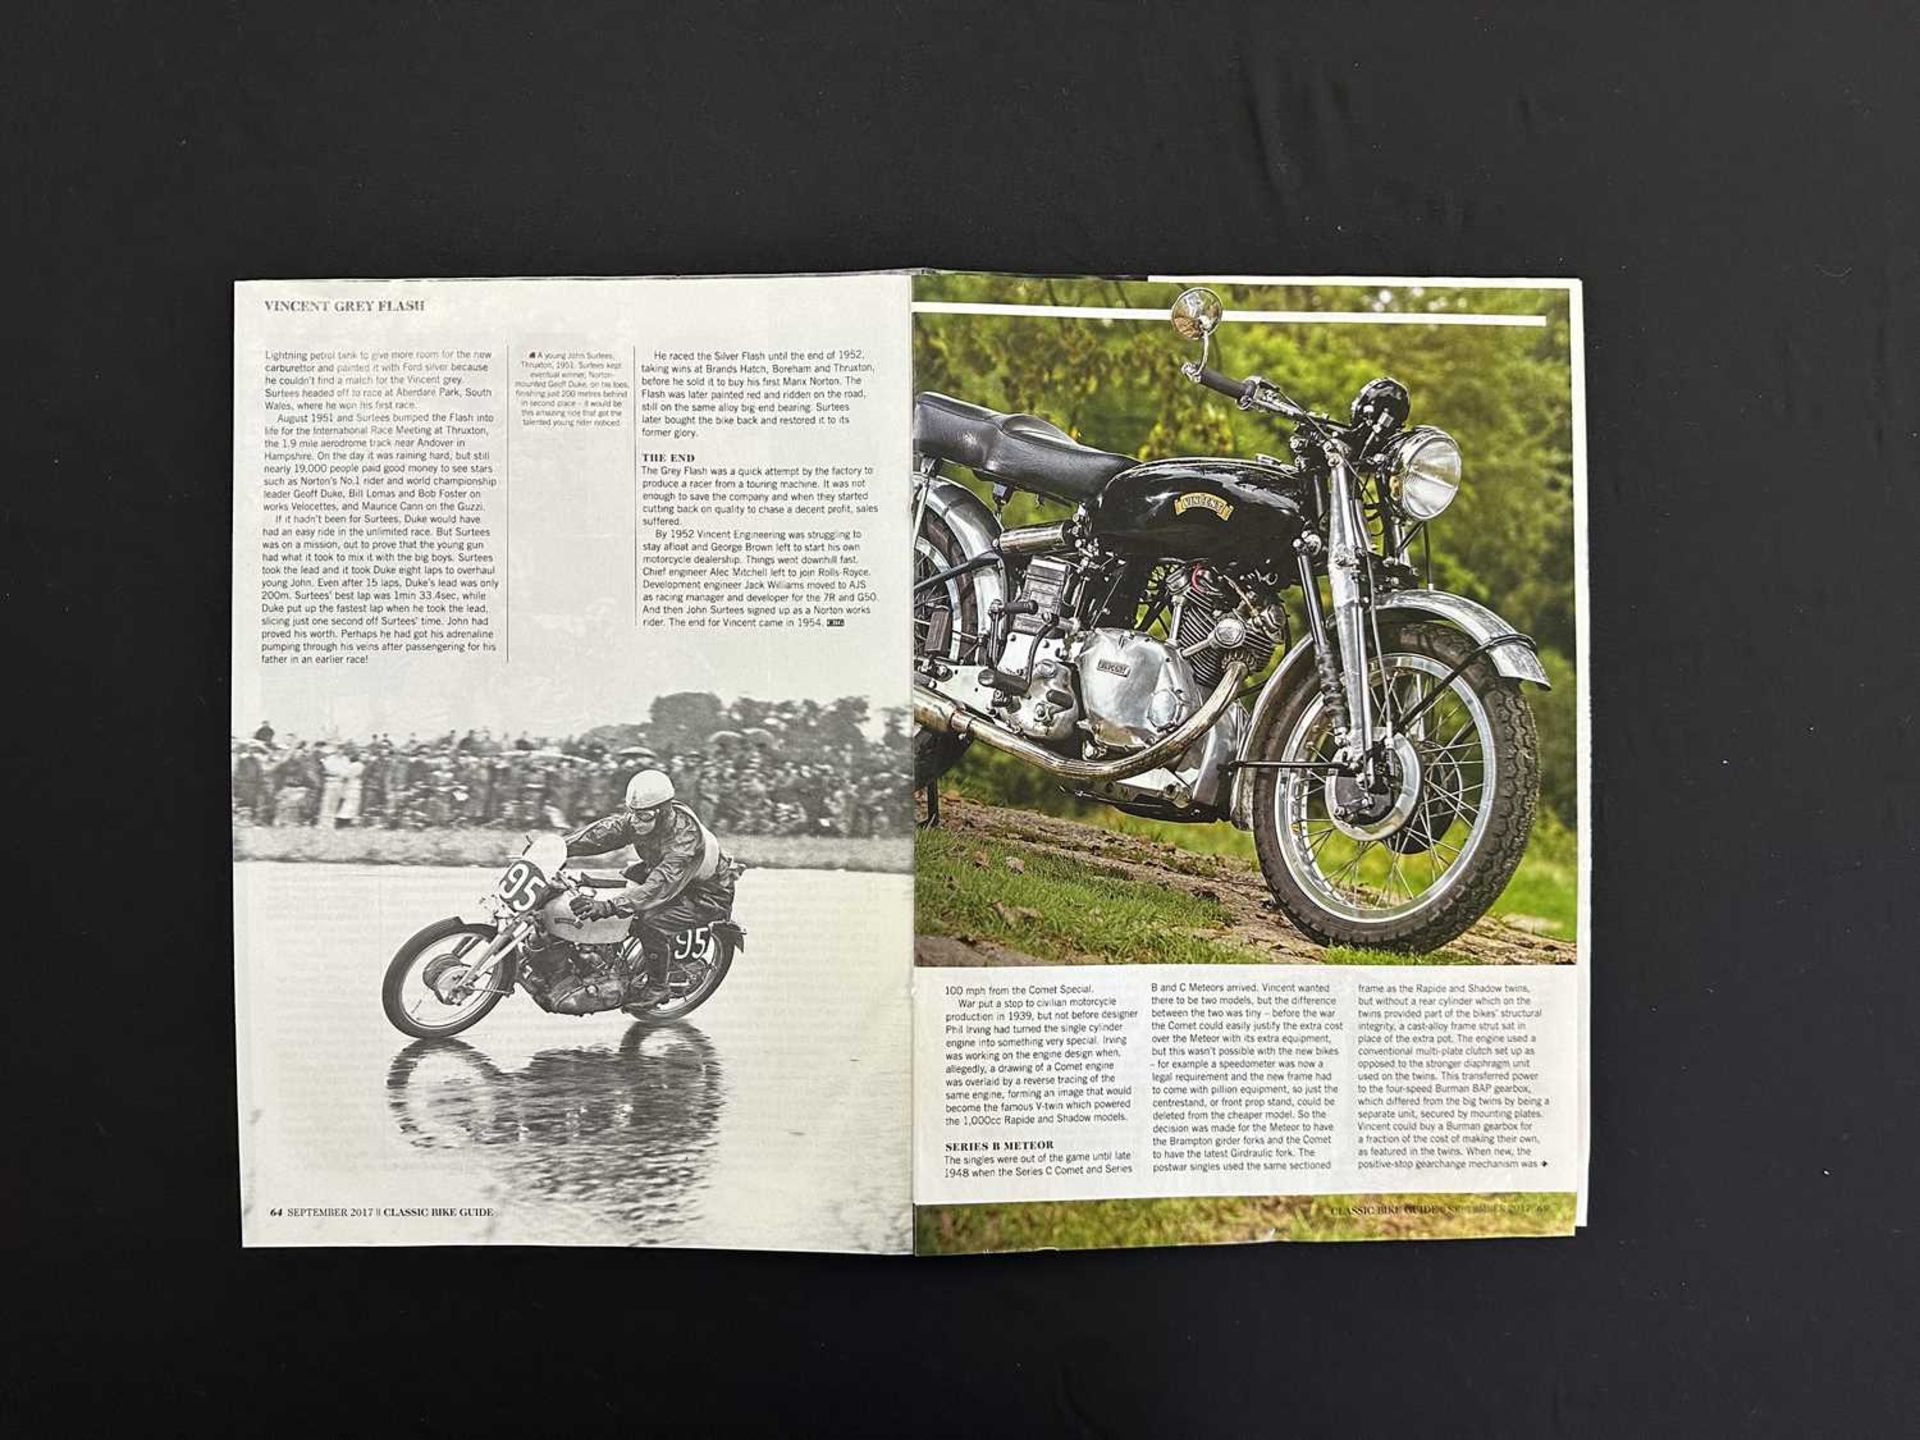 1952 Vincent Comet Comes with an old style log book and dating certificate from the Vincent Owners C - Image 29 of 29